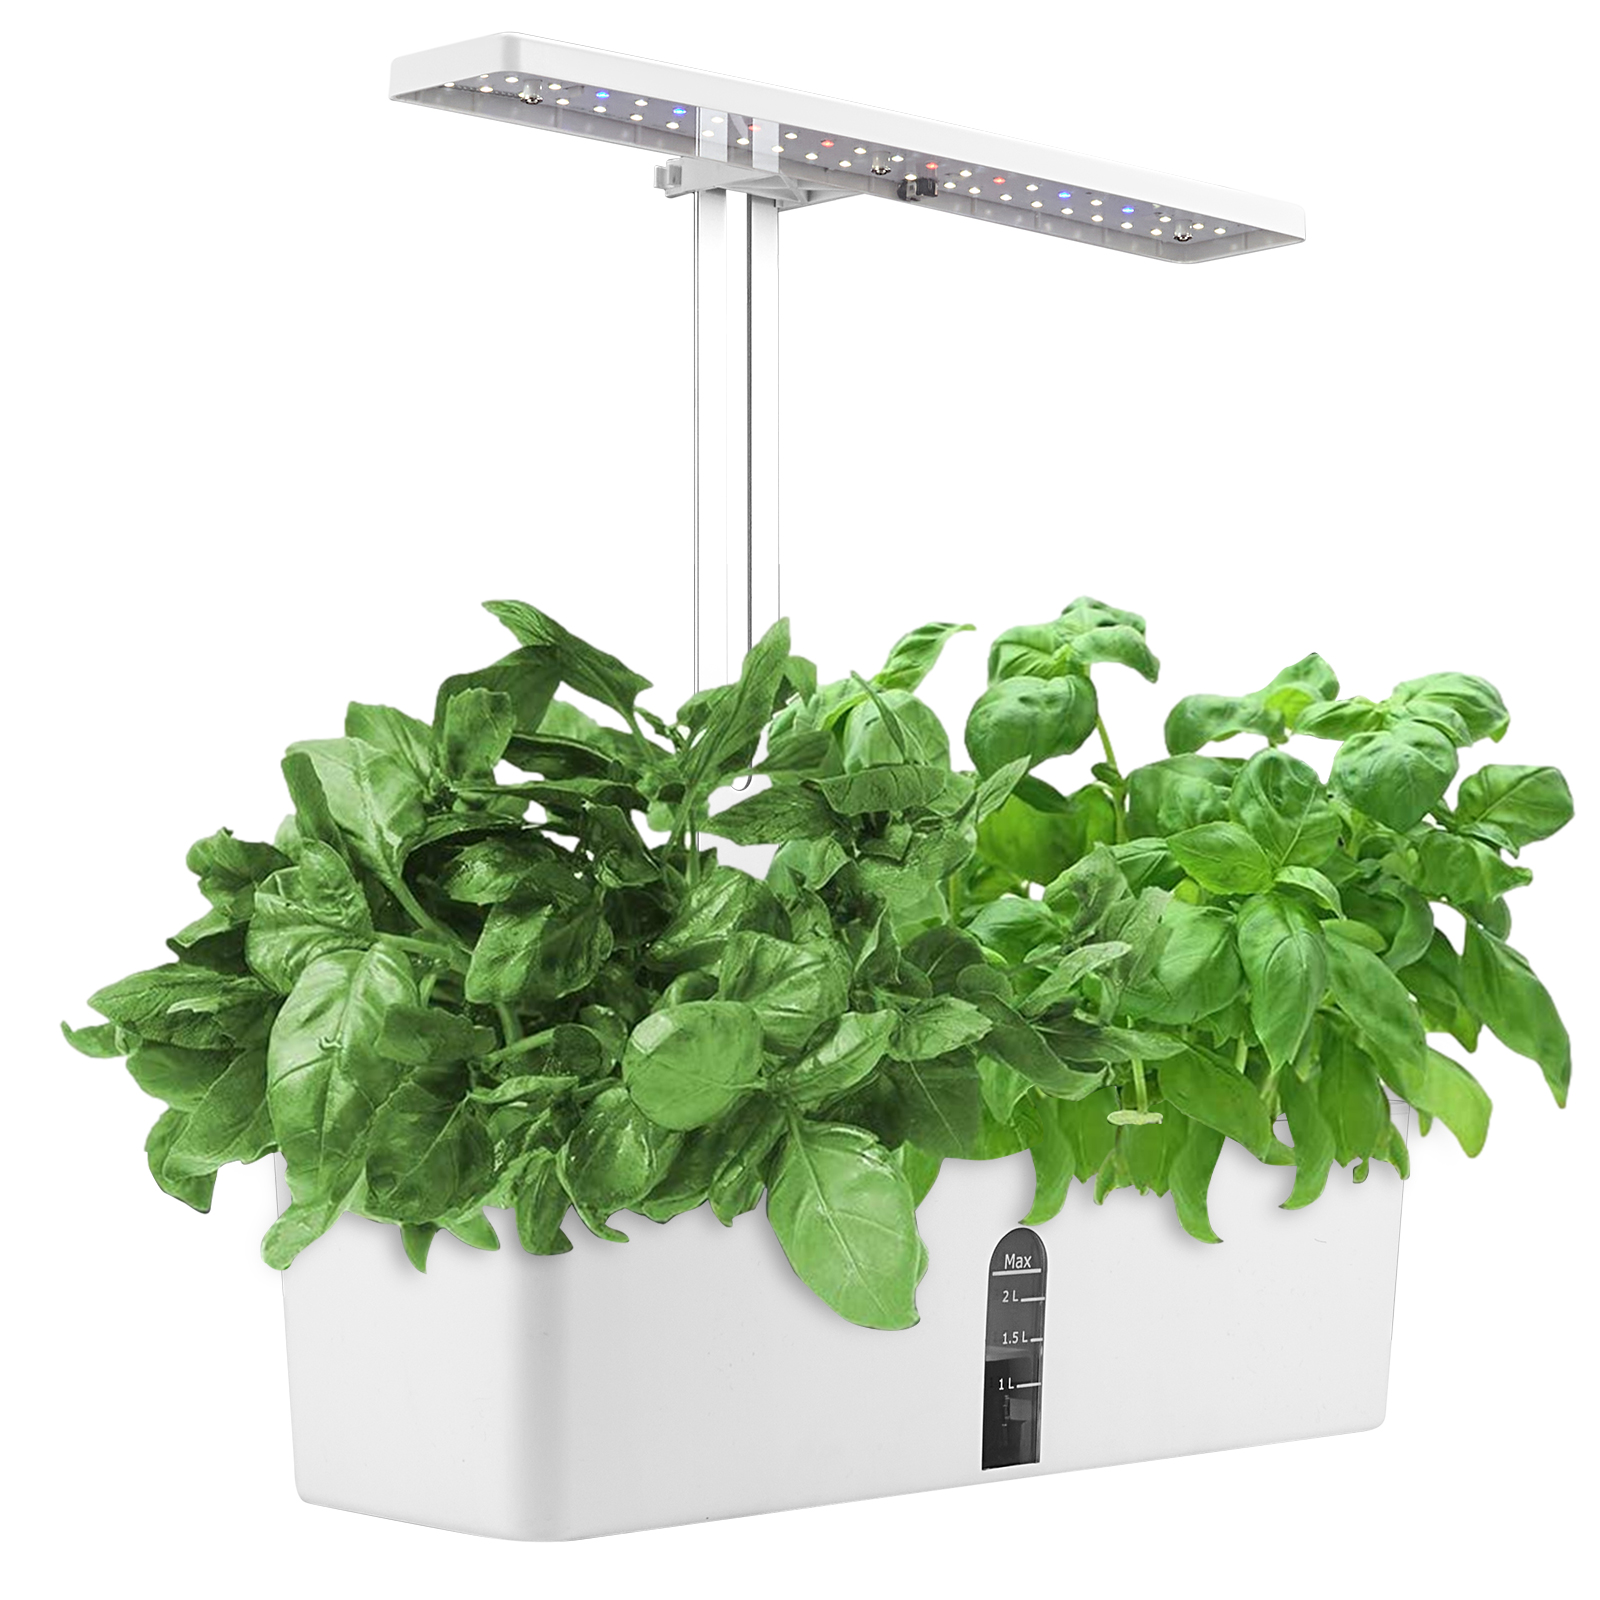 Adjustable LED With Kit For Garden Planter Kitchen Smart Herb Grow Germination System Indoor Growing Hydroponics Growing System